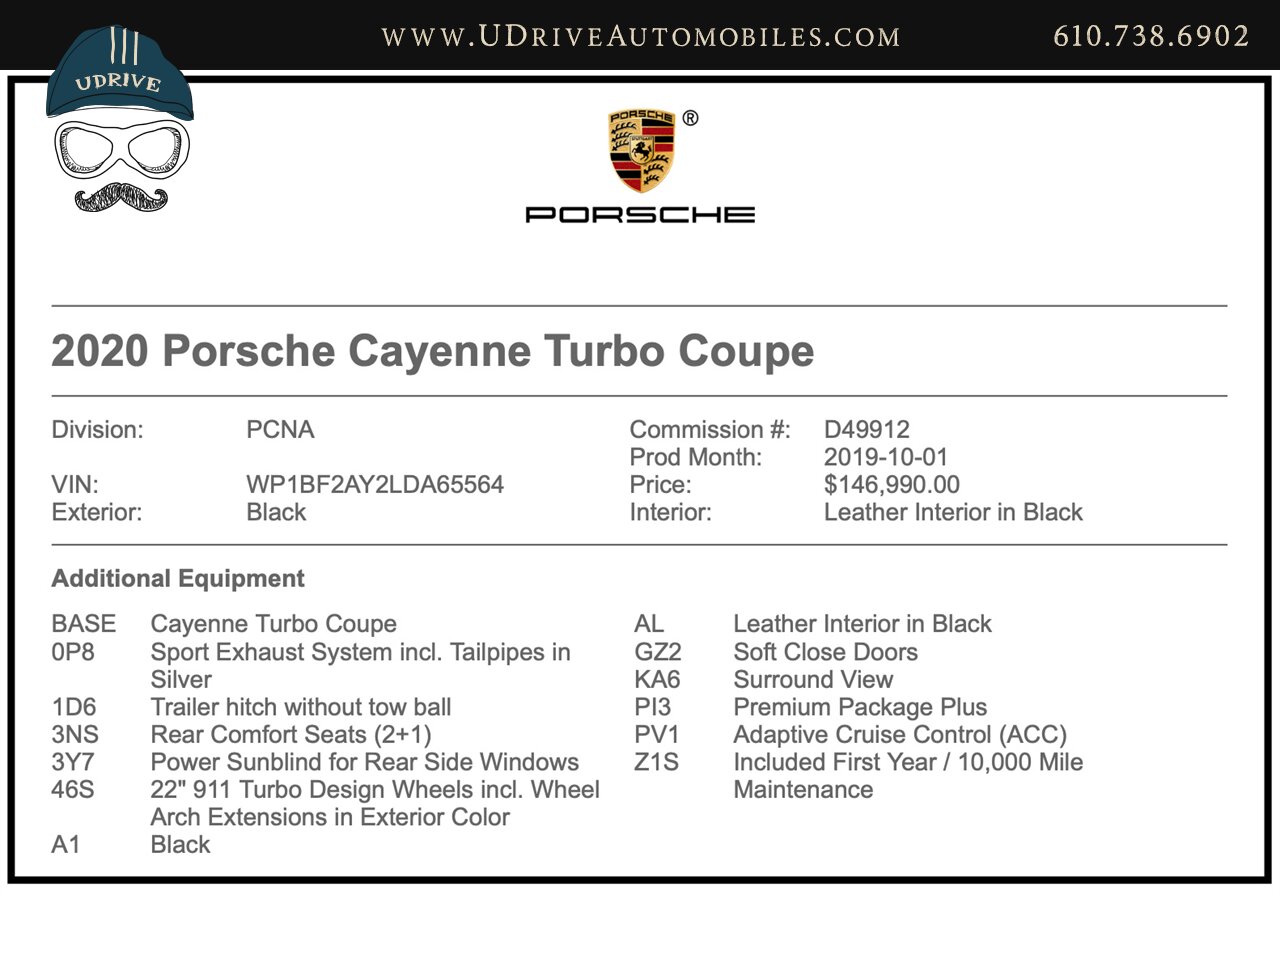 2020 Porsche Cayenne Turbo Coupe 2+1 Rear Comf Seats Prem Plus  22in Turbo Design Whls Sport Exhst Adap Cruise Surround View - Photo 2 - West Chester, PA 19382